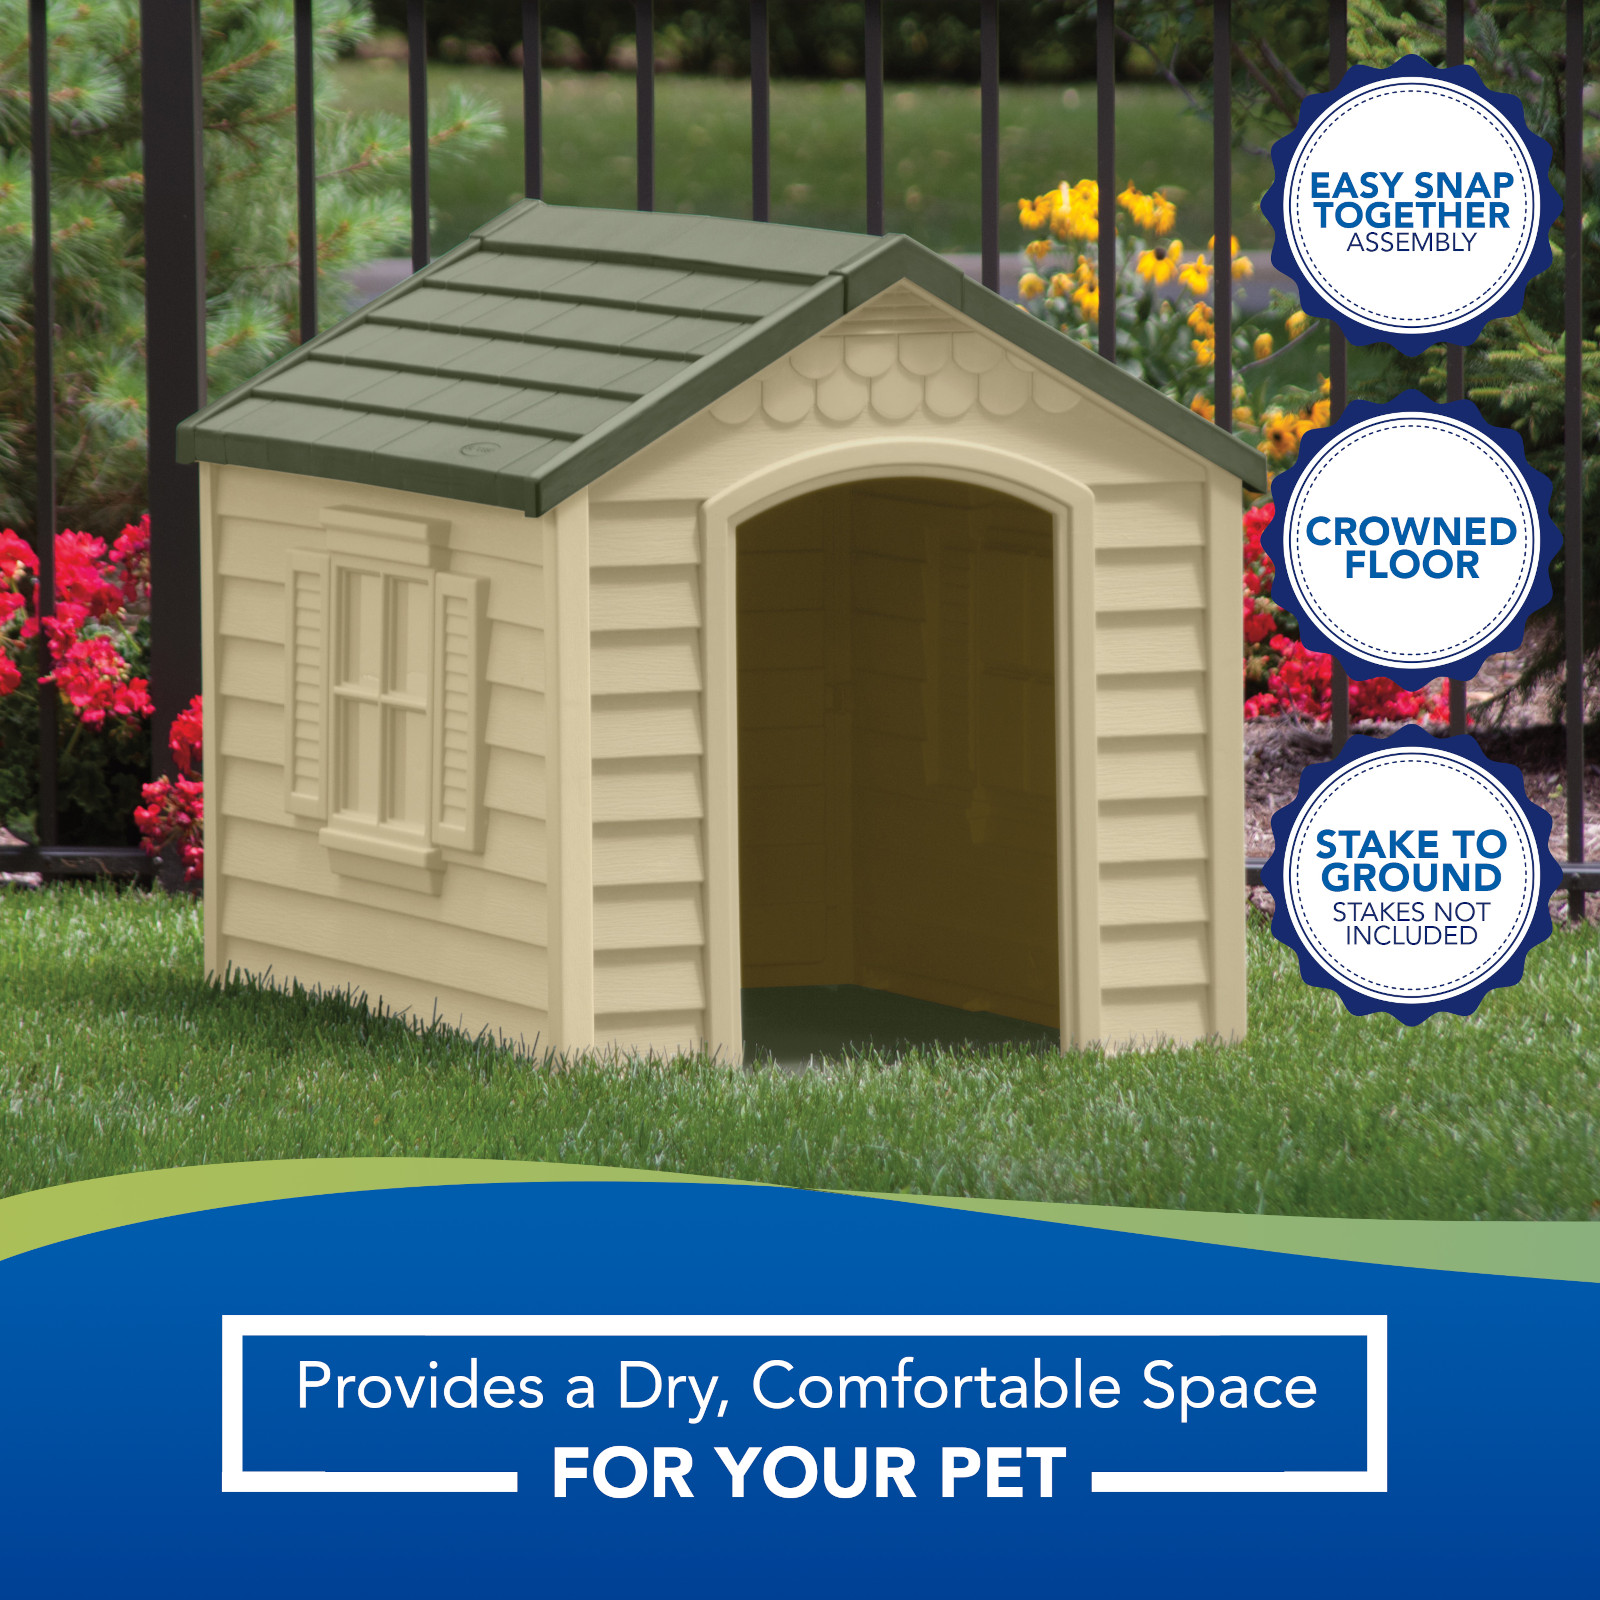 Suncast DH250 Durable Resin Snap Together Dog House with Removable Roof, Brown, Small/Medium Dogs - image 5 of 7